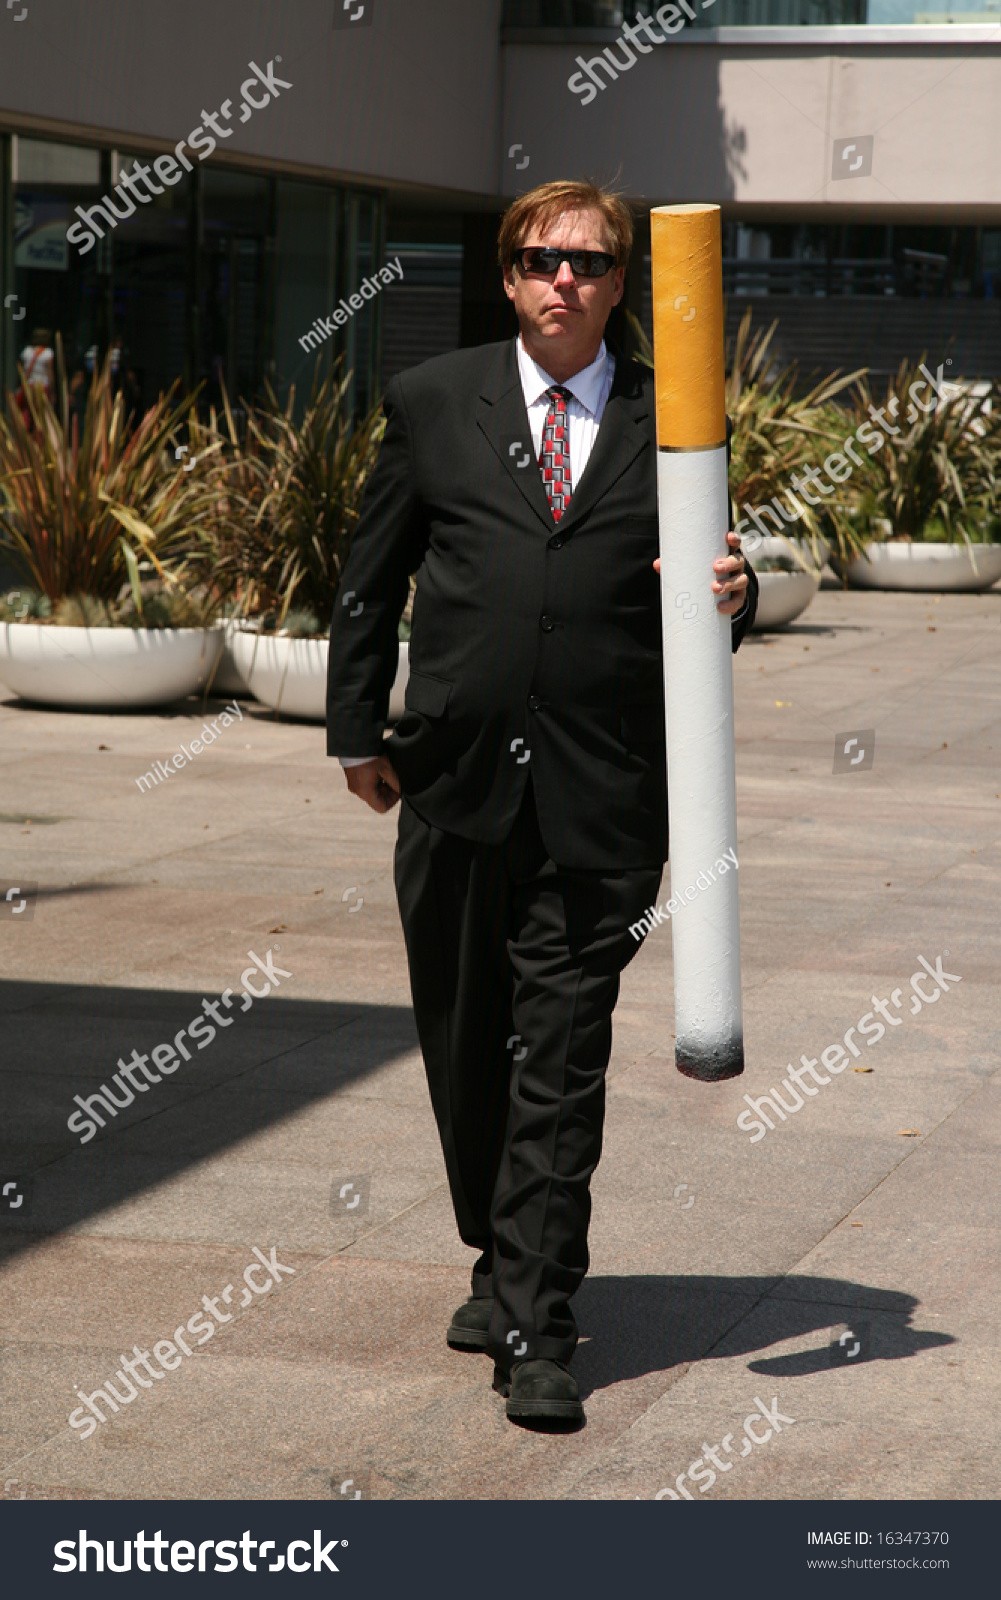 stock-photo-anti-smoking-concepts-a-business-man-in-a-suit-holds-a-giant-cigarette-with-a-book-of-matches-16347370.jpg